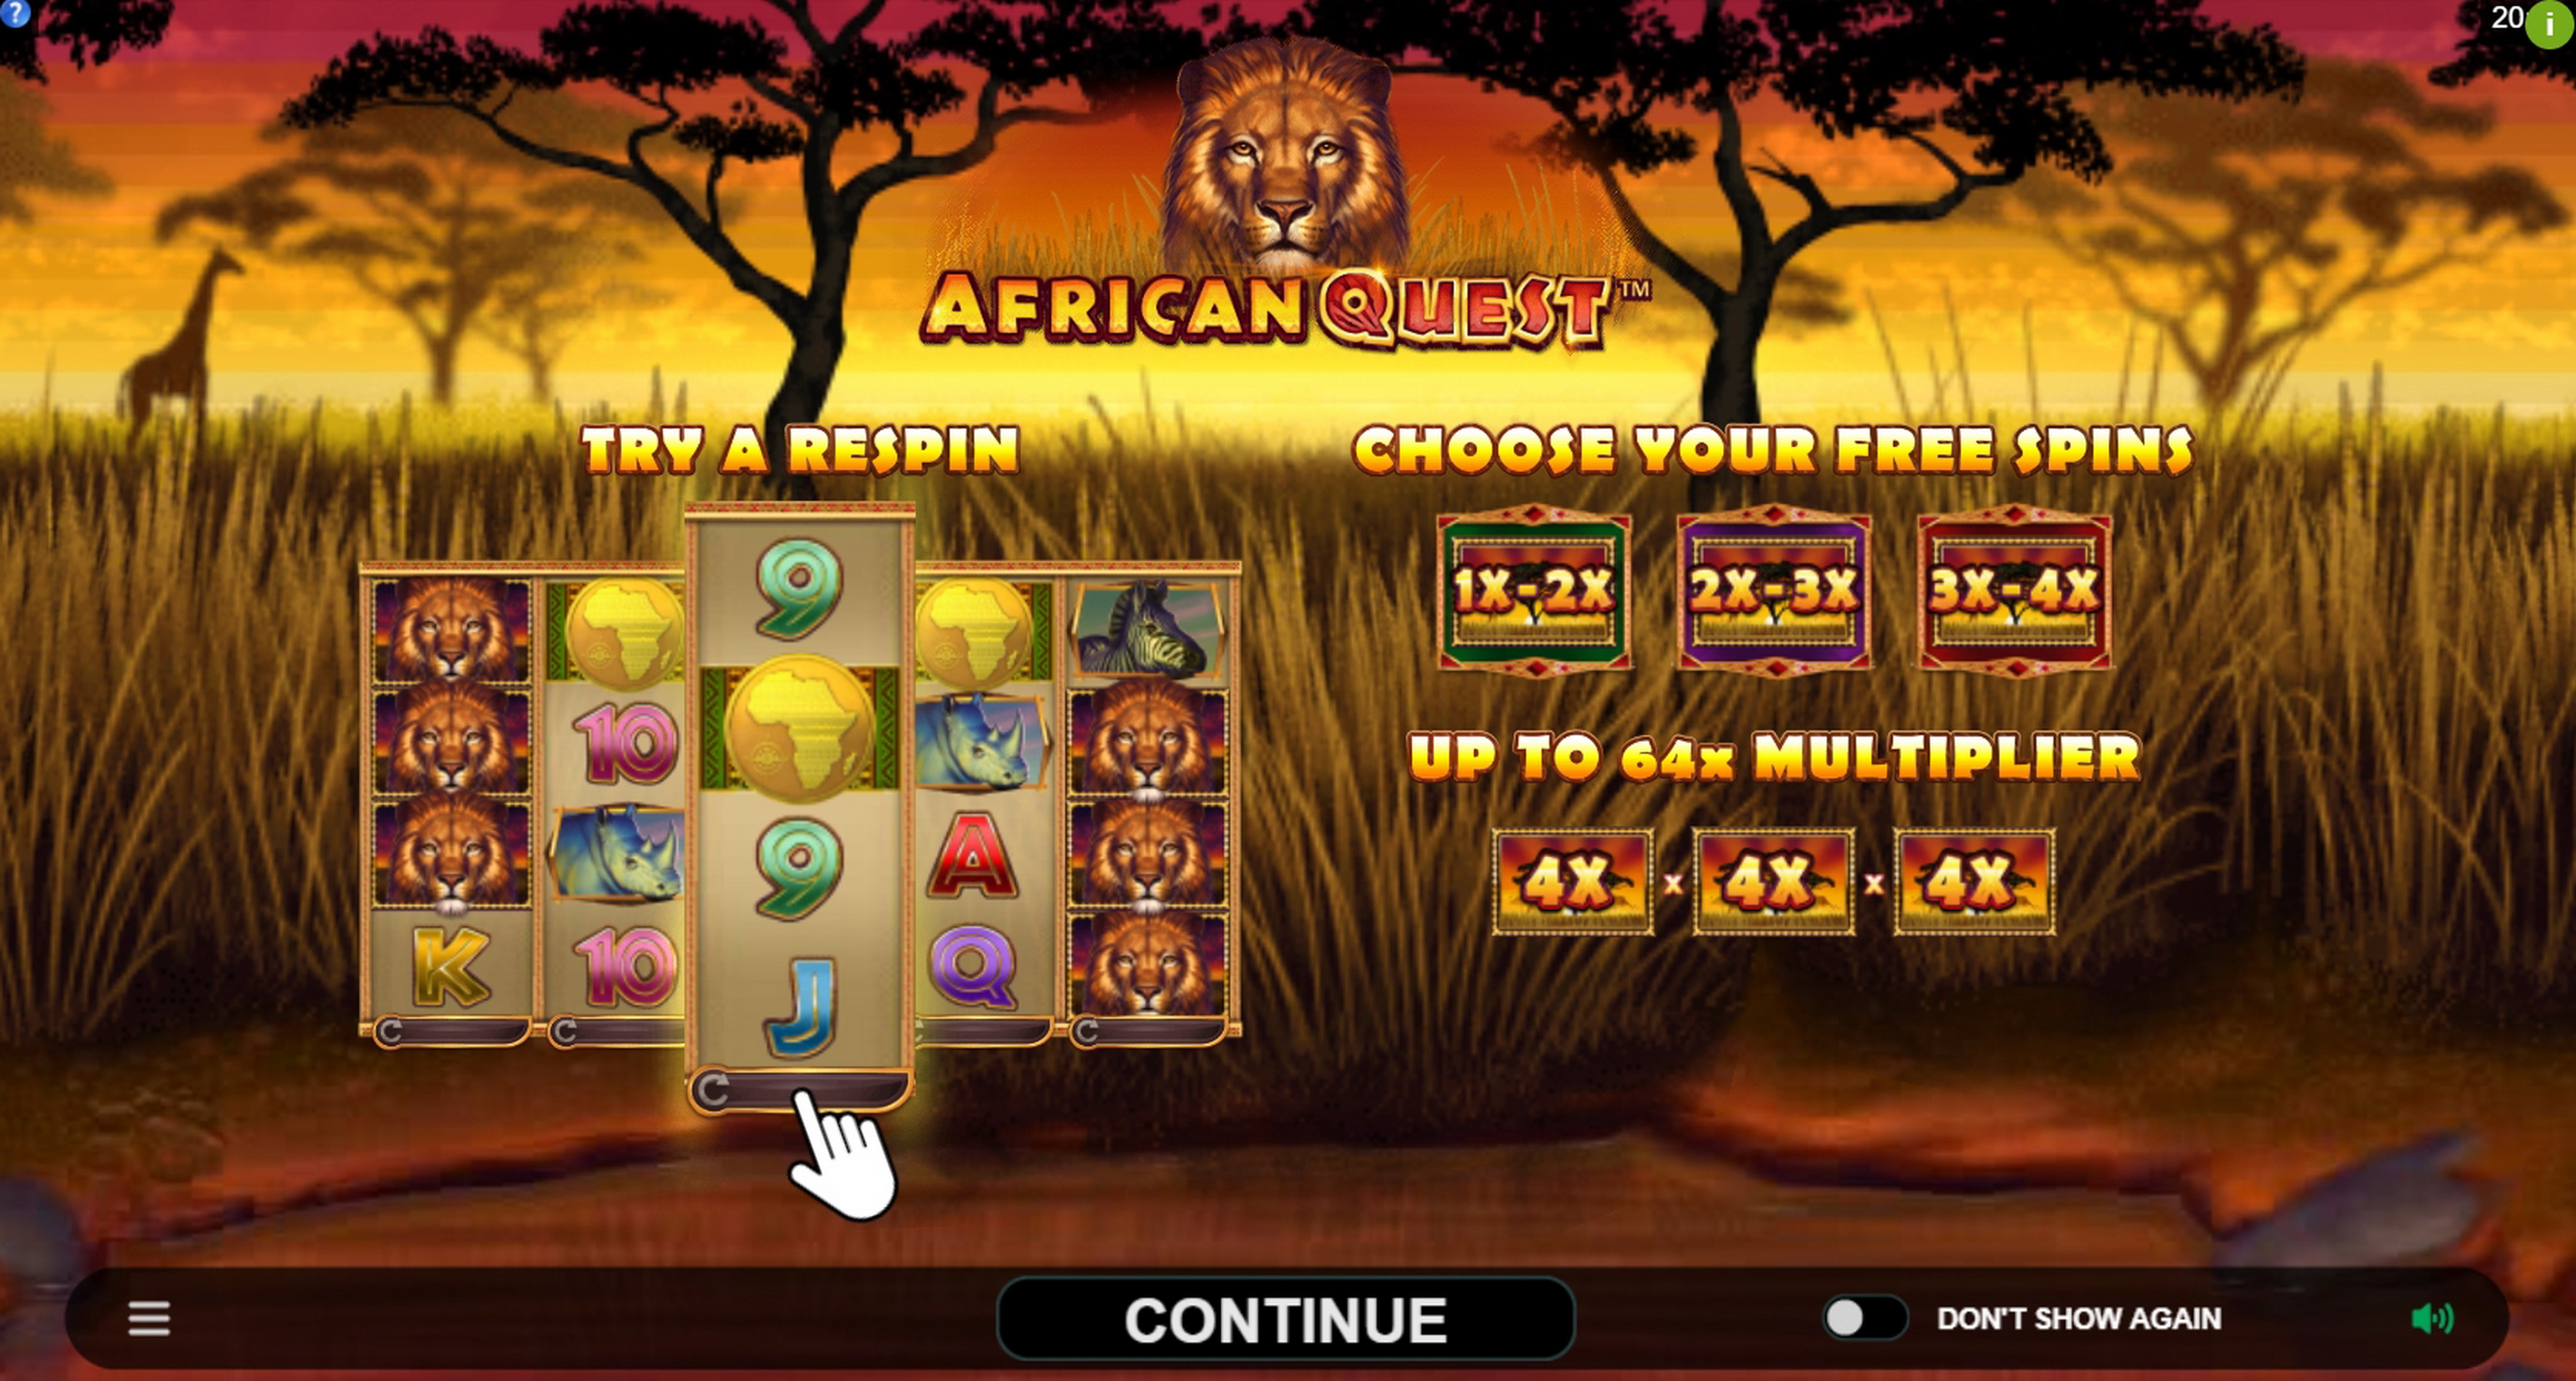 Play African Quest Free Casino Slot Game by Triple Edge Studios